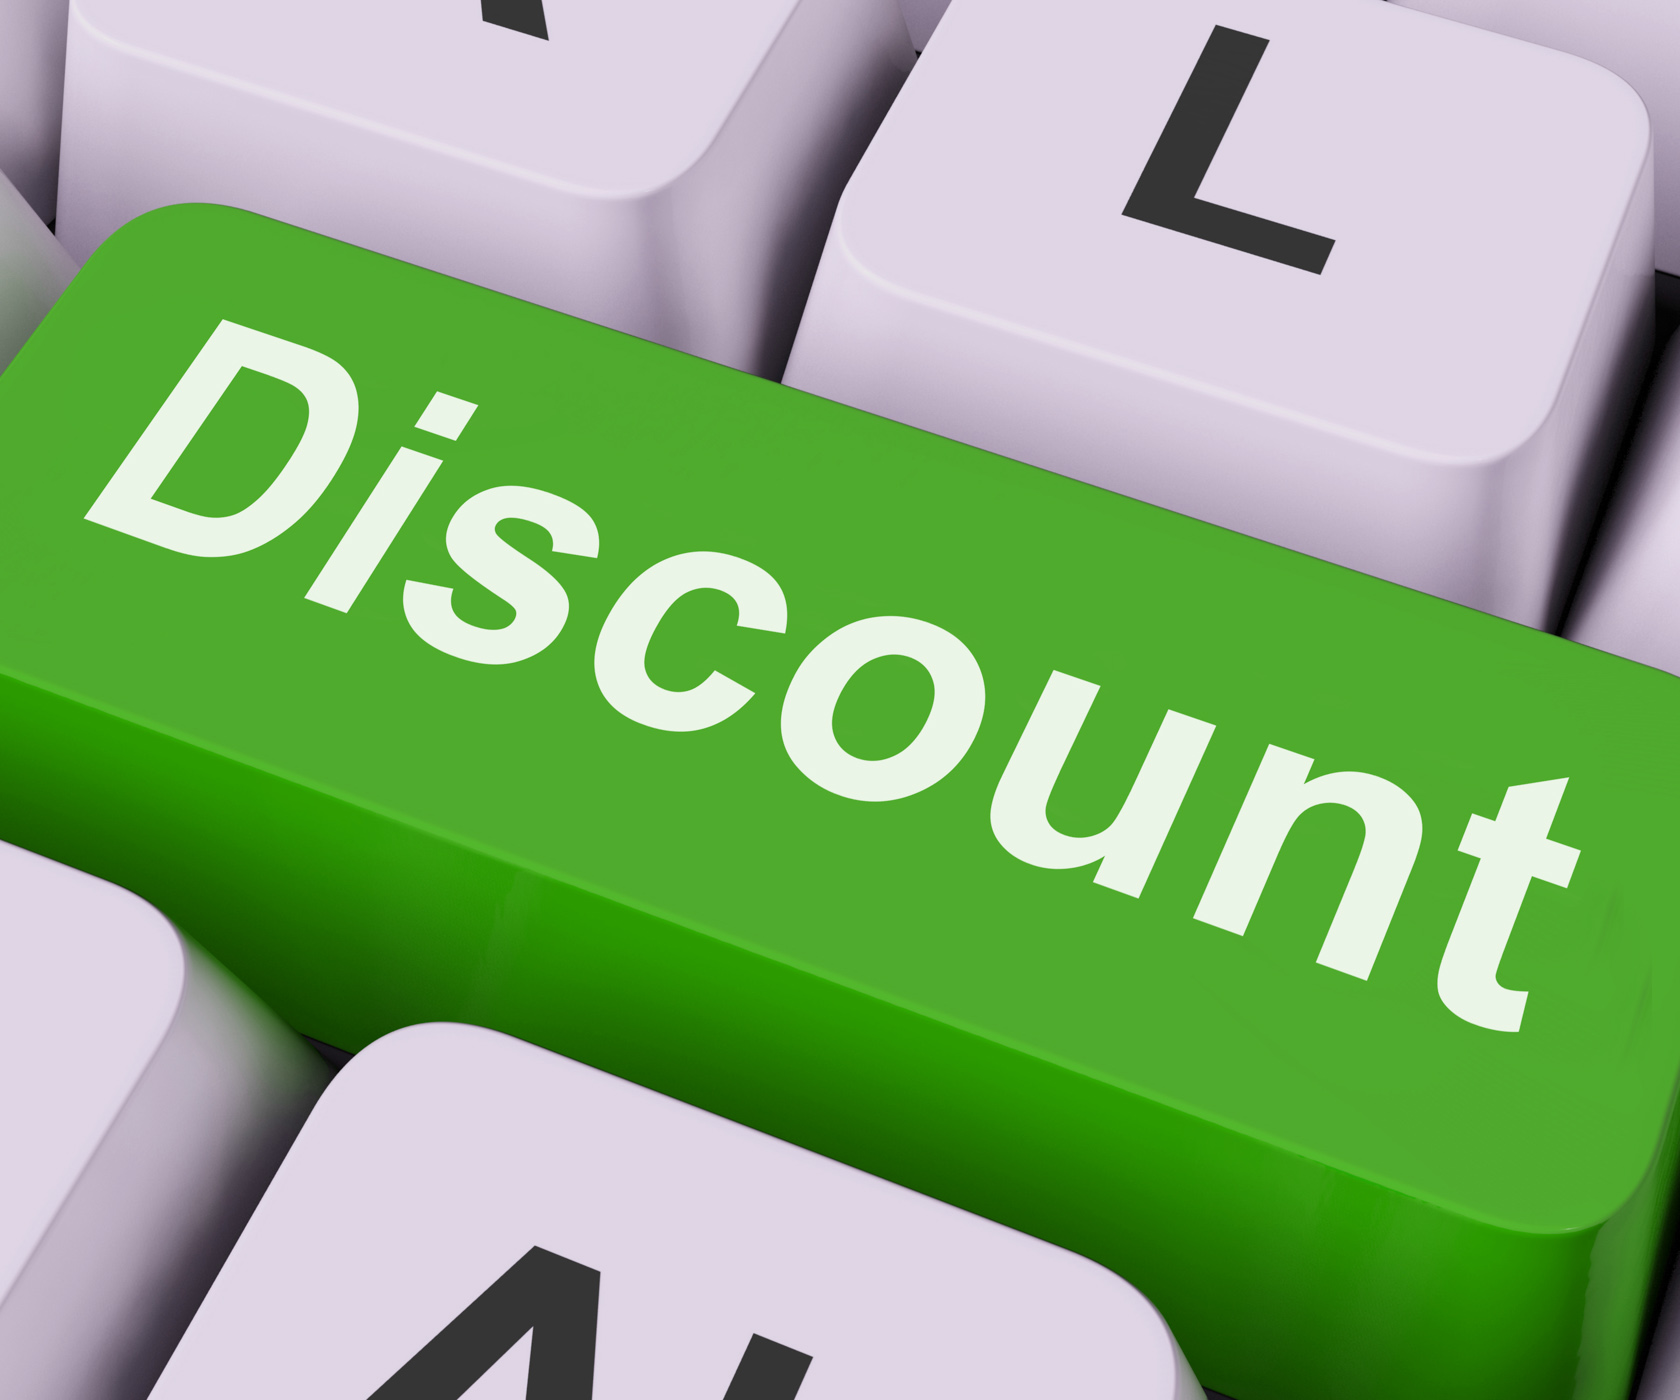 Discount key means cut price or reduce photo